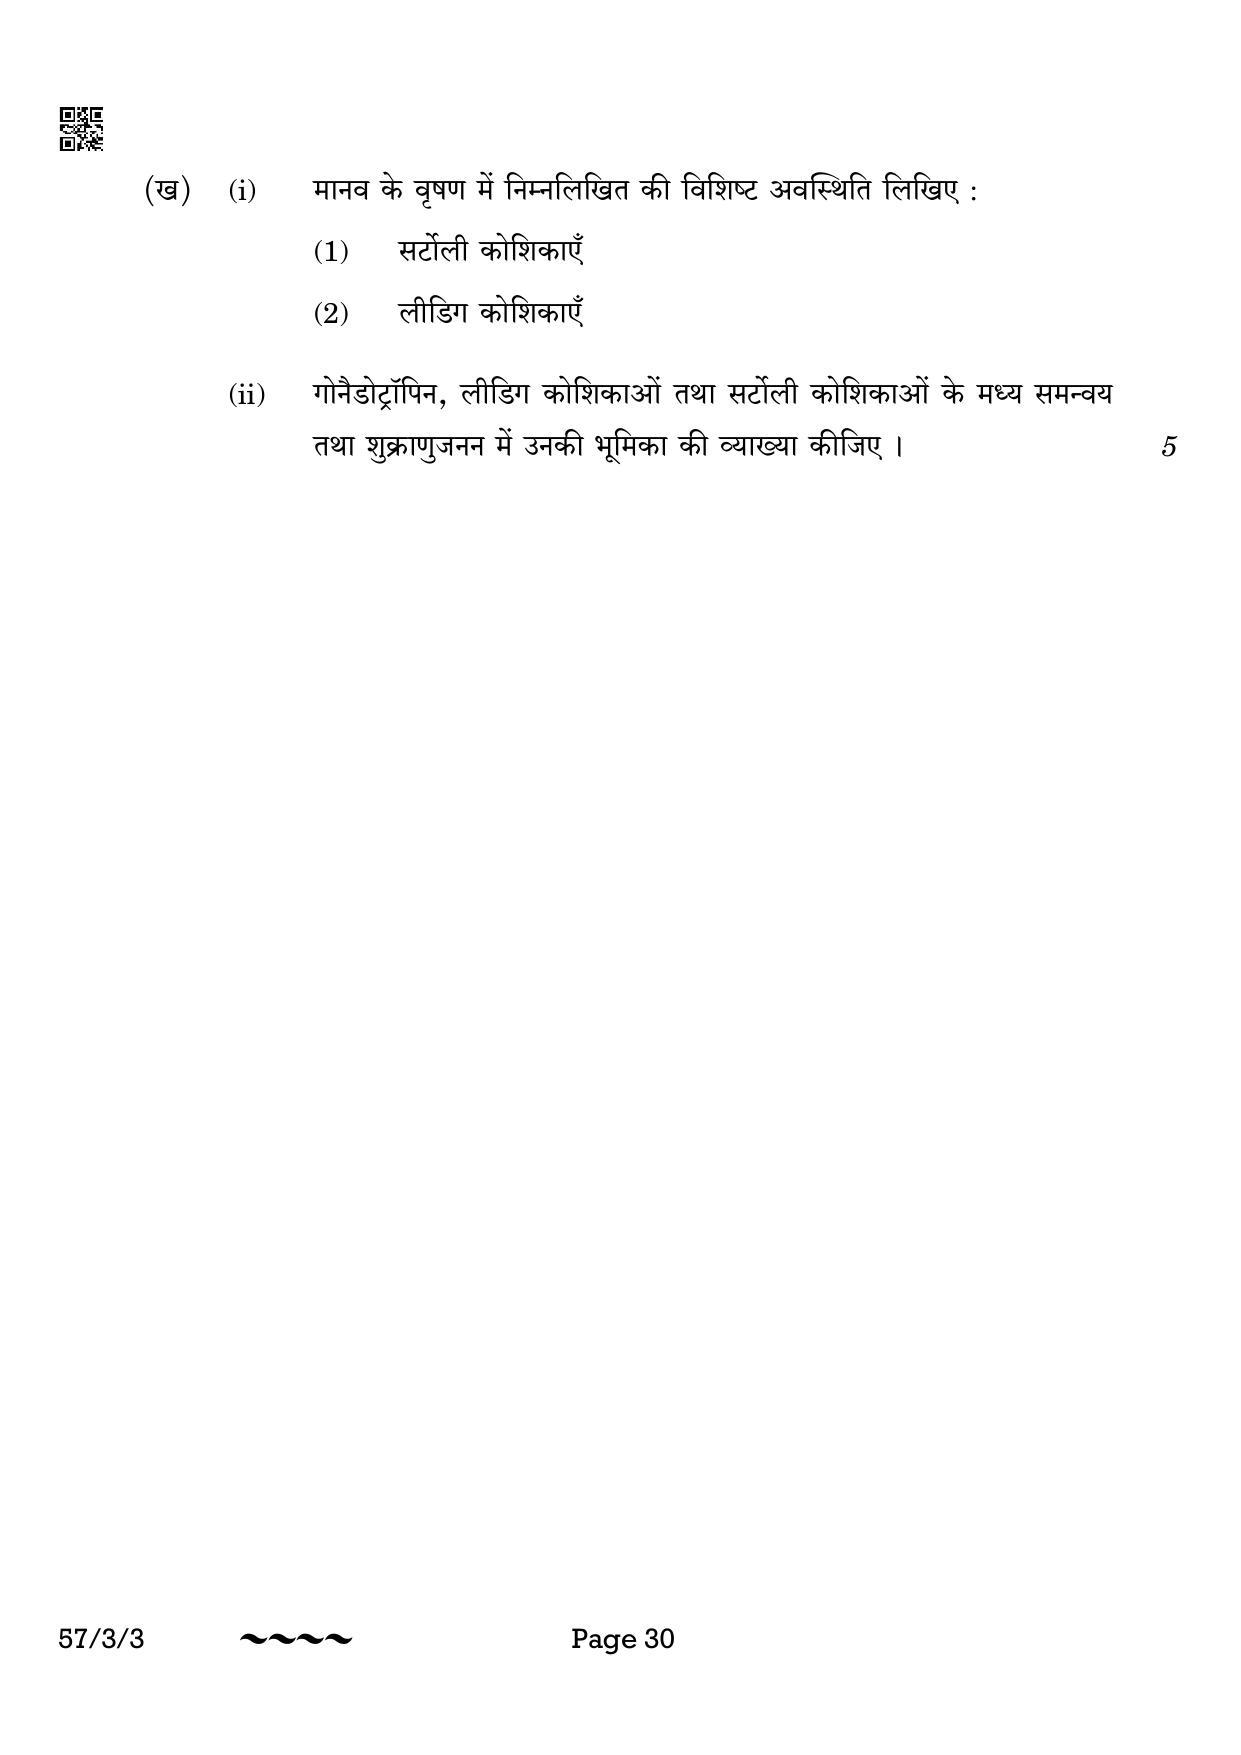 CBSE Class 12 57-3-3 Biology 2023 Question Paper - Page 30